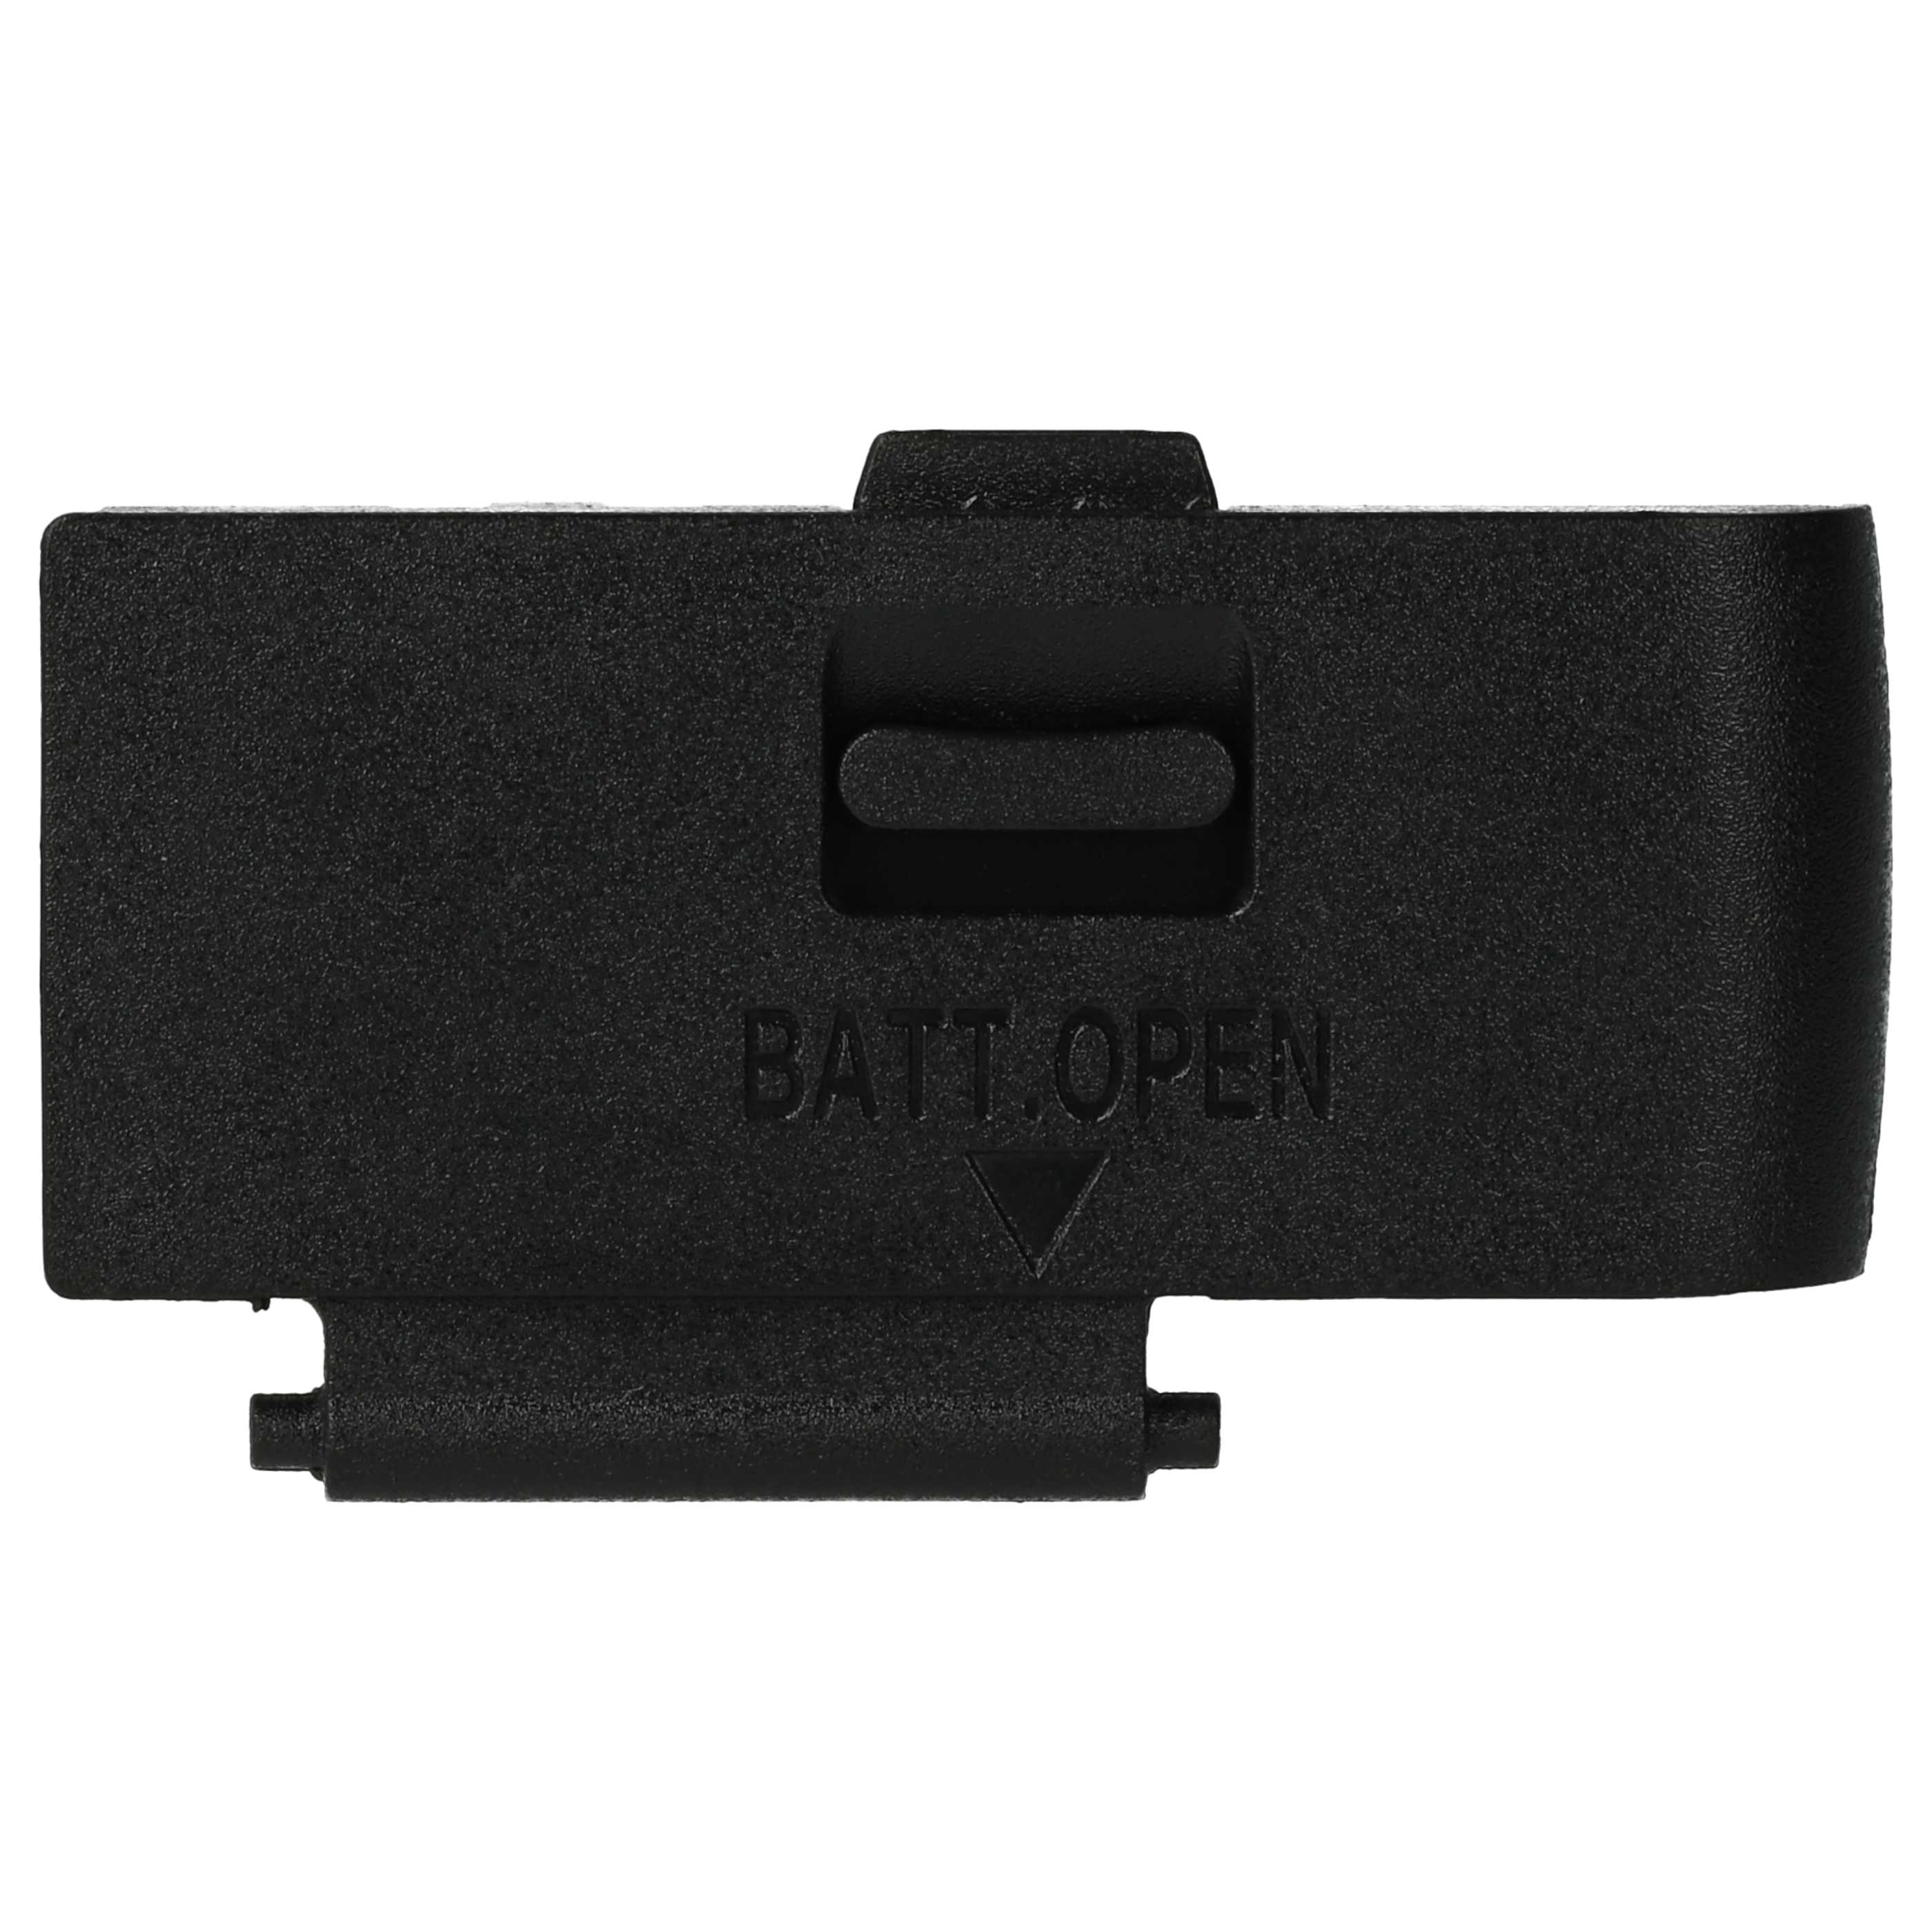 Battery Door Cover suitable for Canon EOS 700D, Rebel T5i, Kiss X7i Camera, Battery Grip